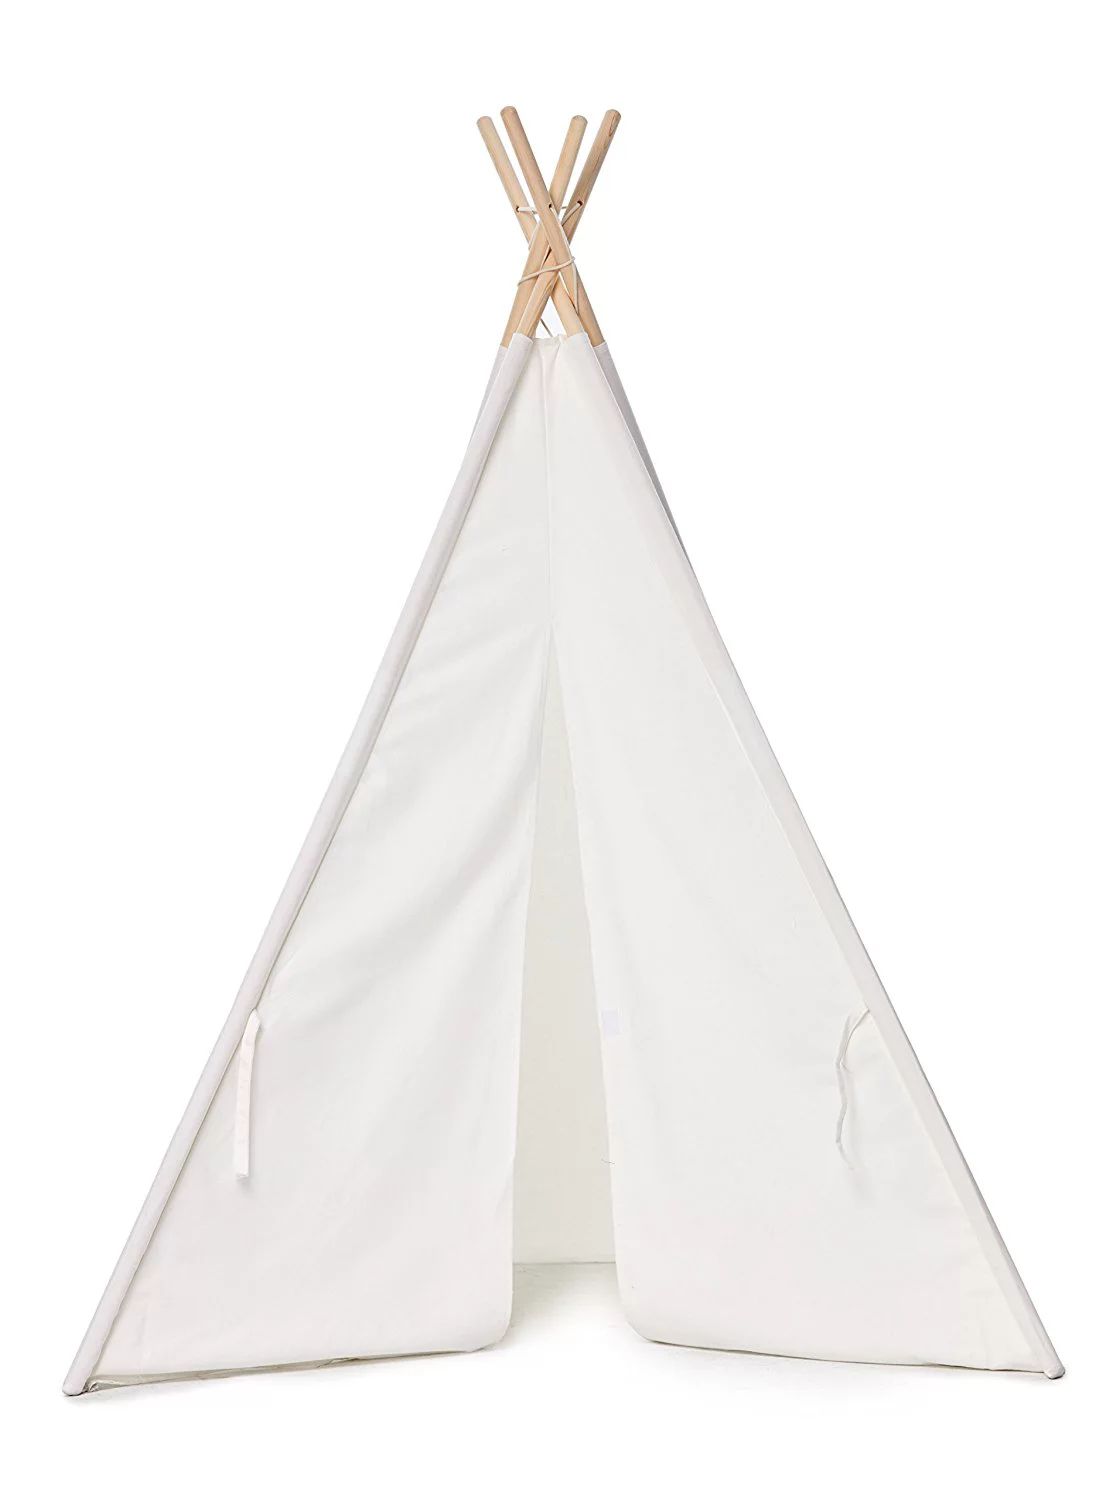 the Miller Teepee, Kids Play Tent, 100% Natural Cotton Canvas Teepee Tent for Kids with Carrying ... | Walmart (US)